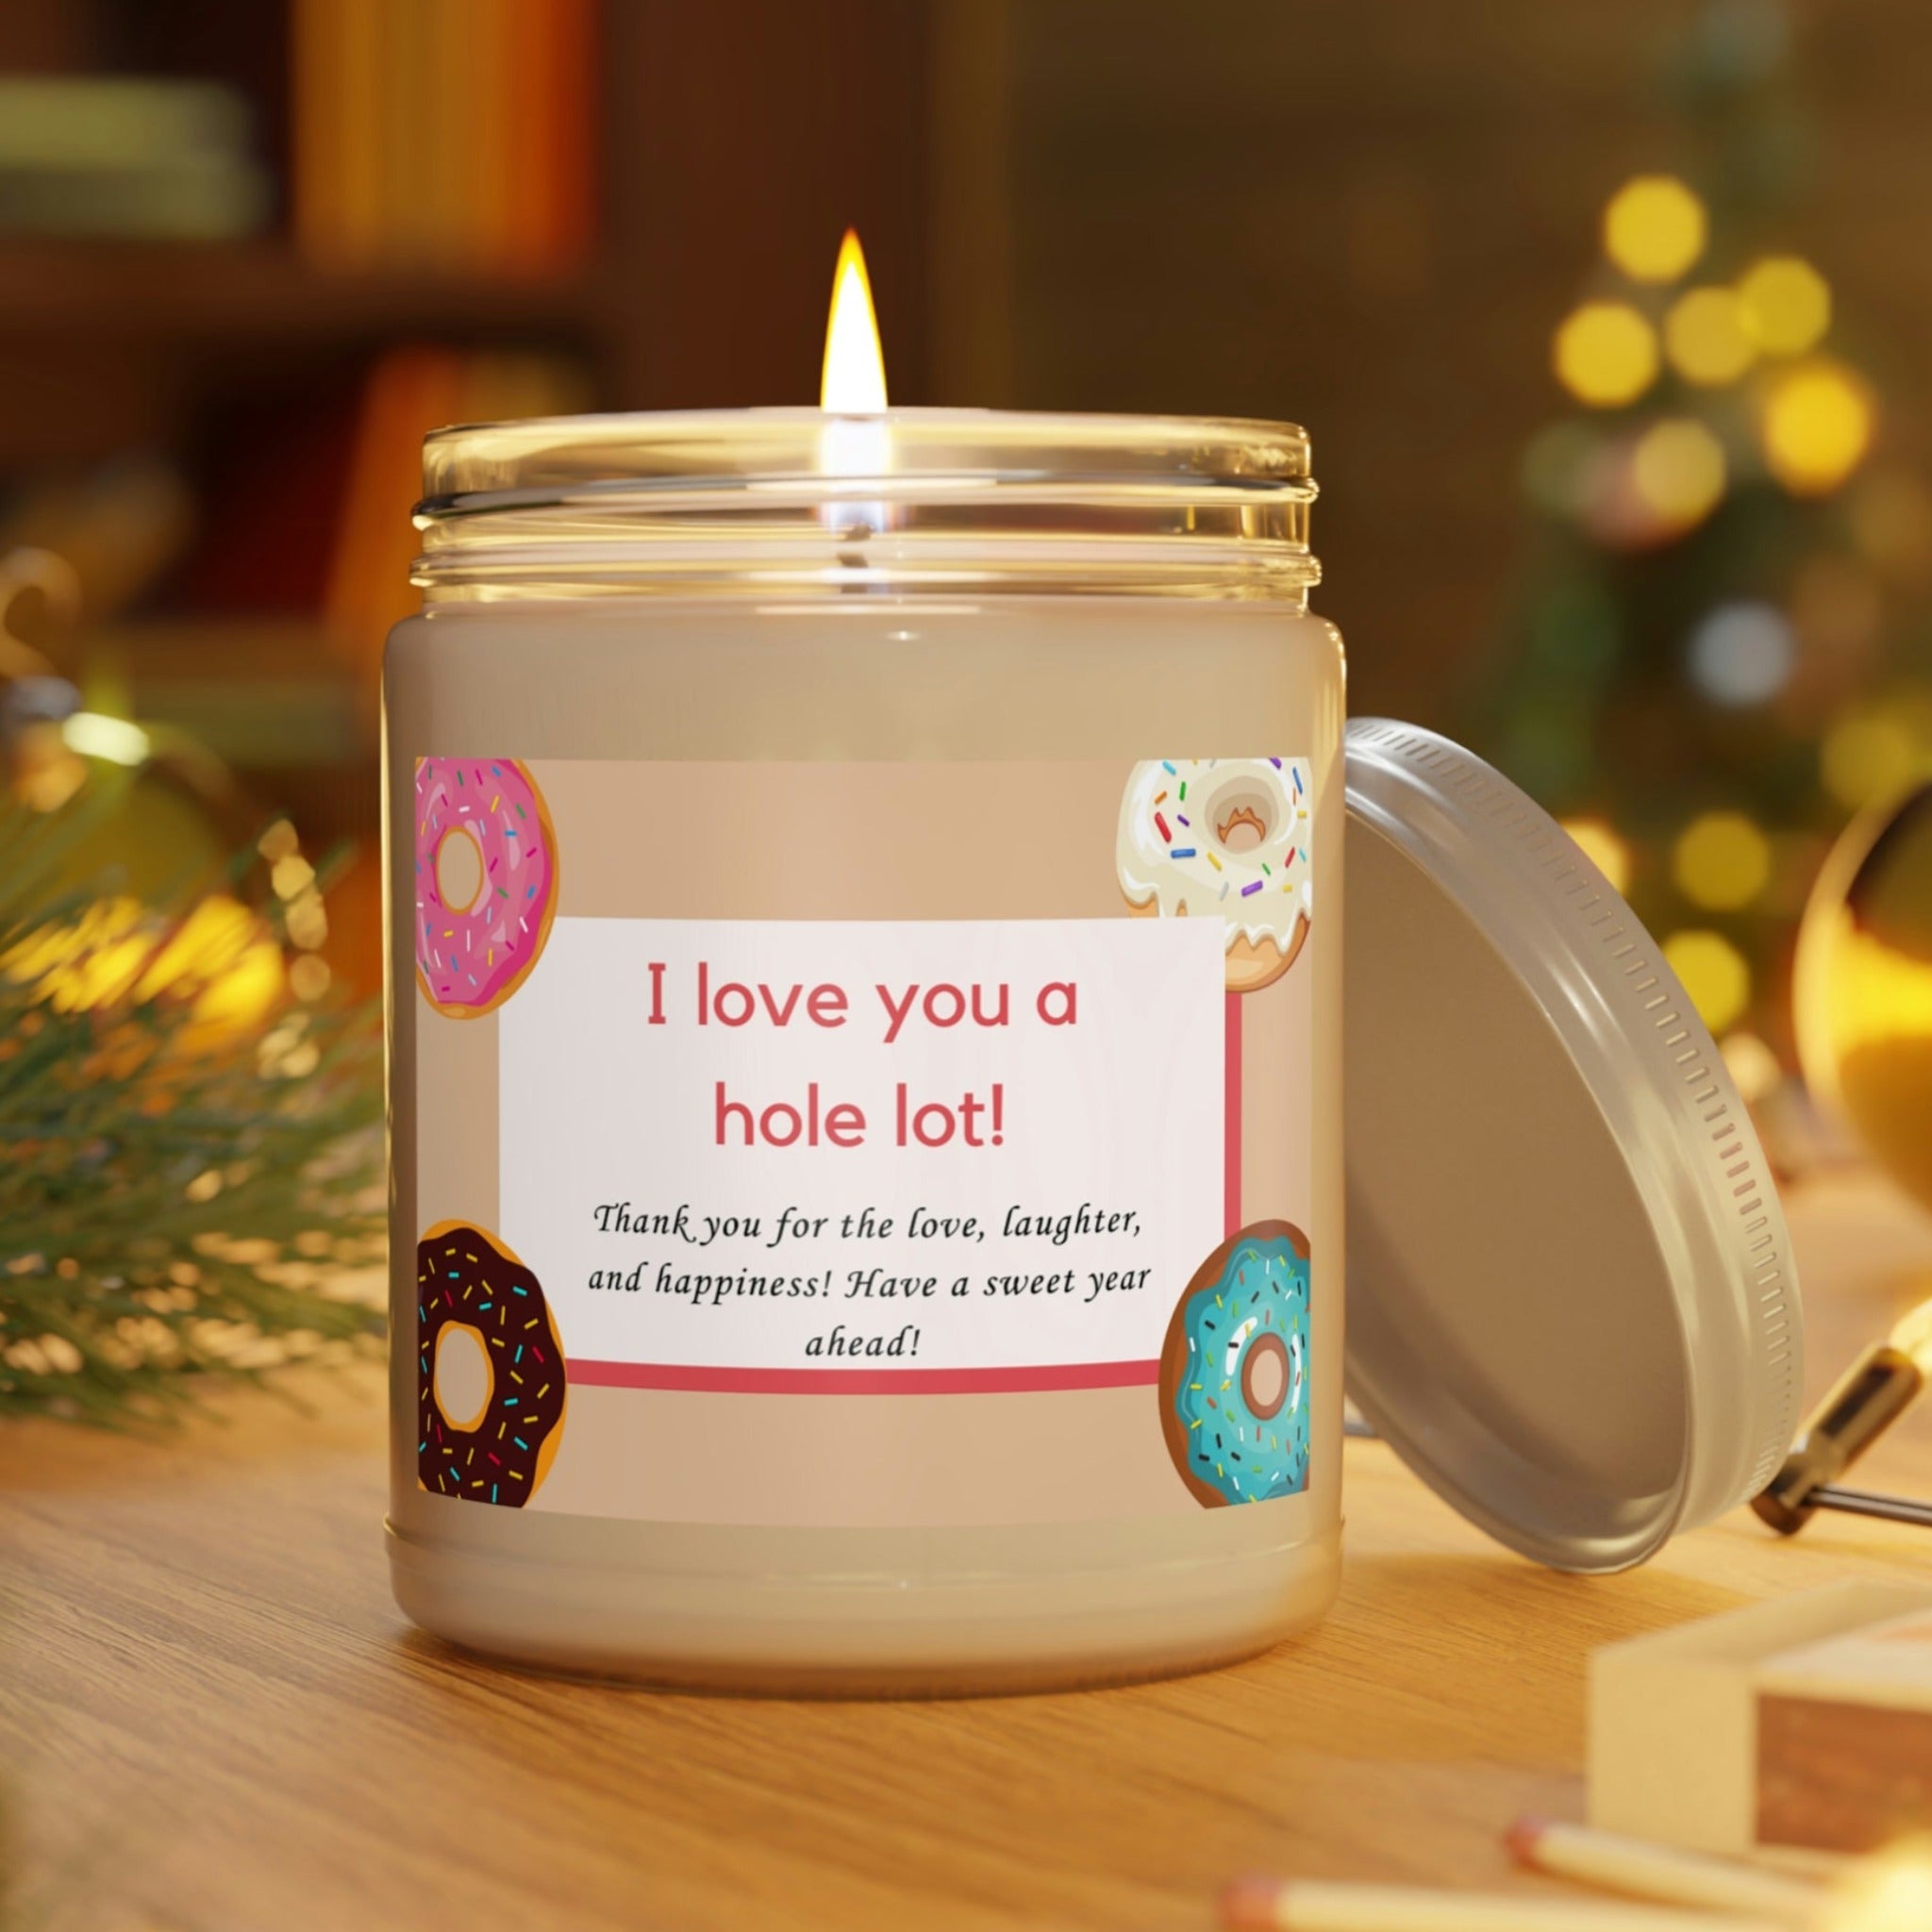 Donut Love Aromatherapy Scented Candle 9 oz sitting on table